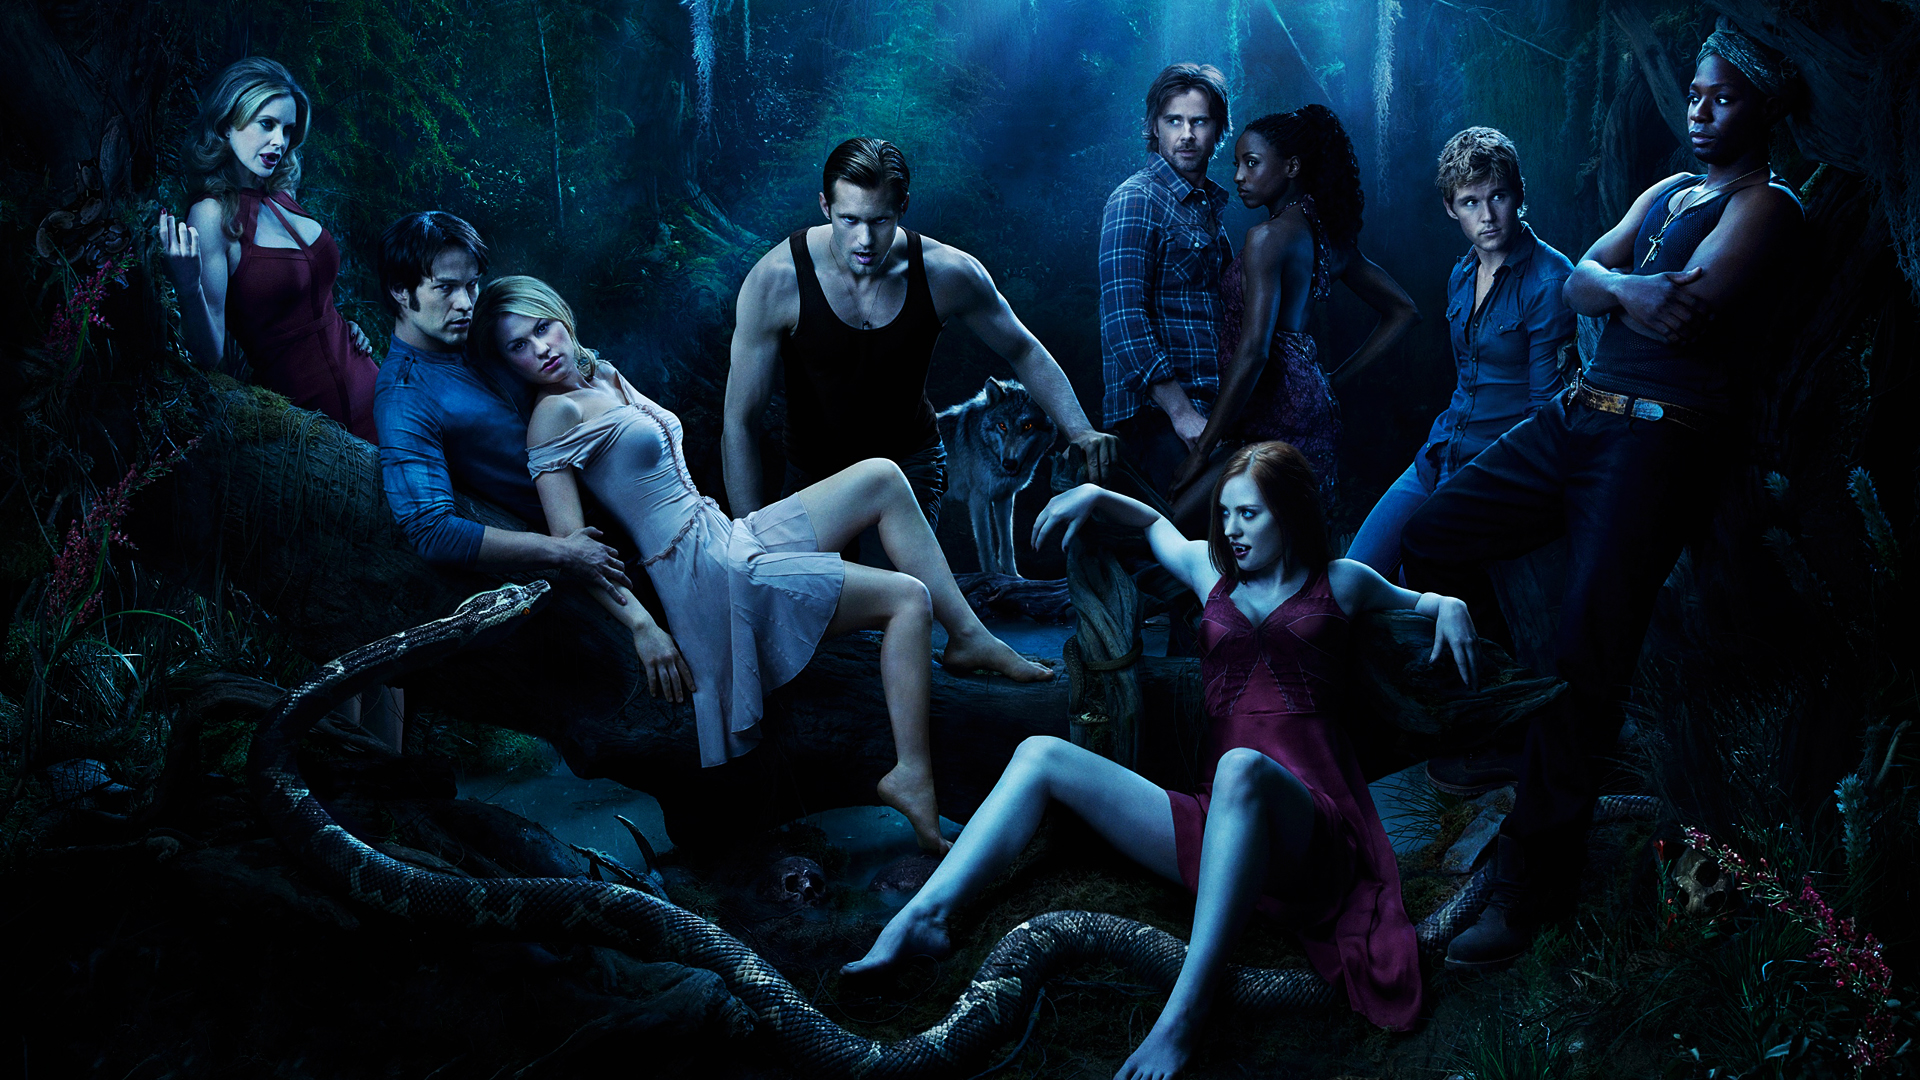 Ps The People In True Blood Must Have Like This Orgy Fest Every Time